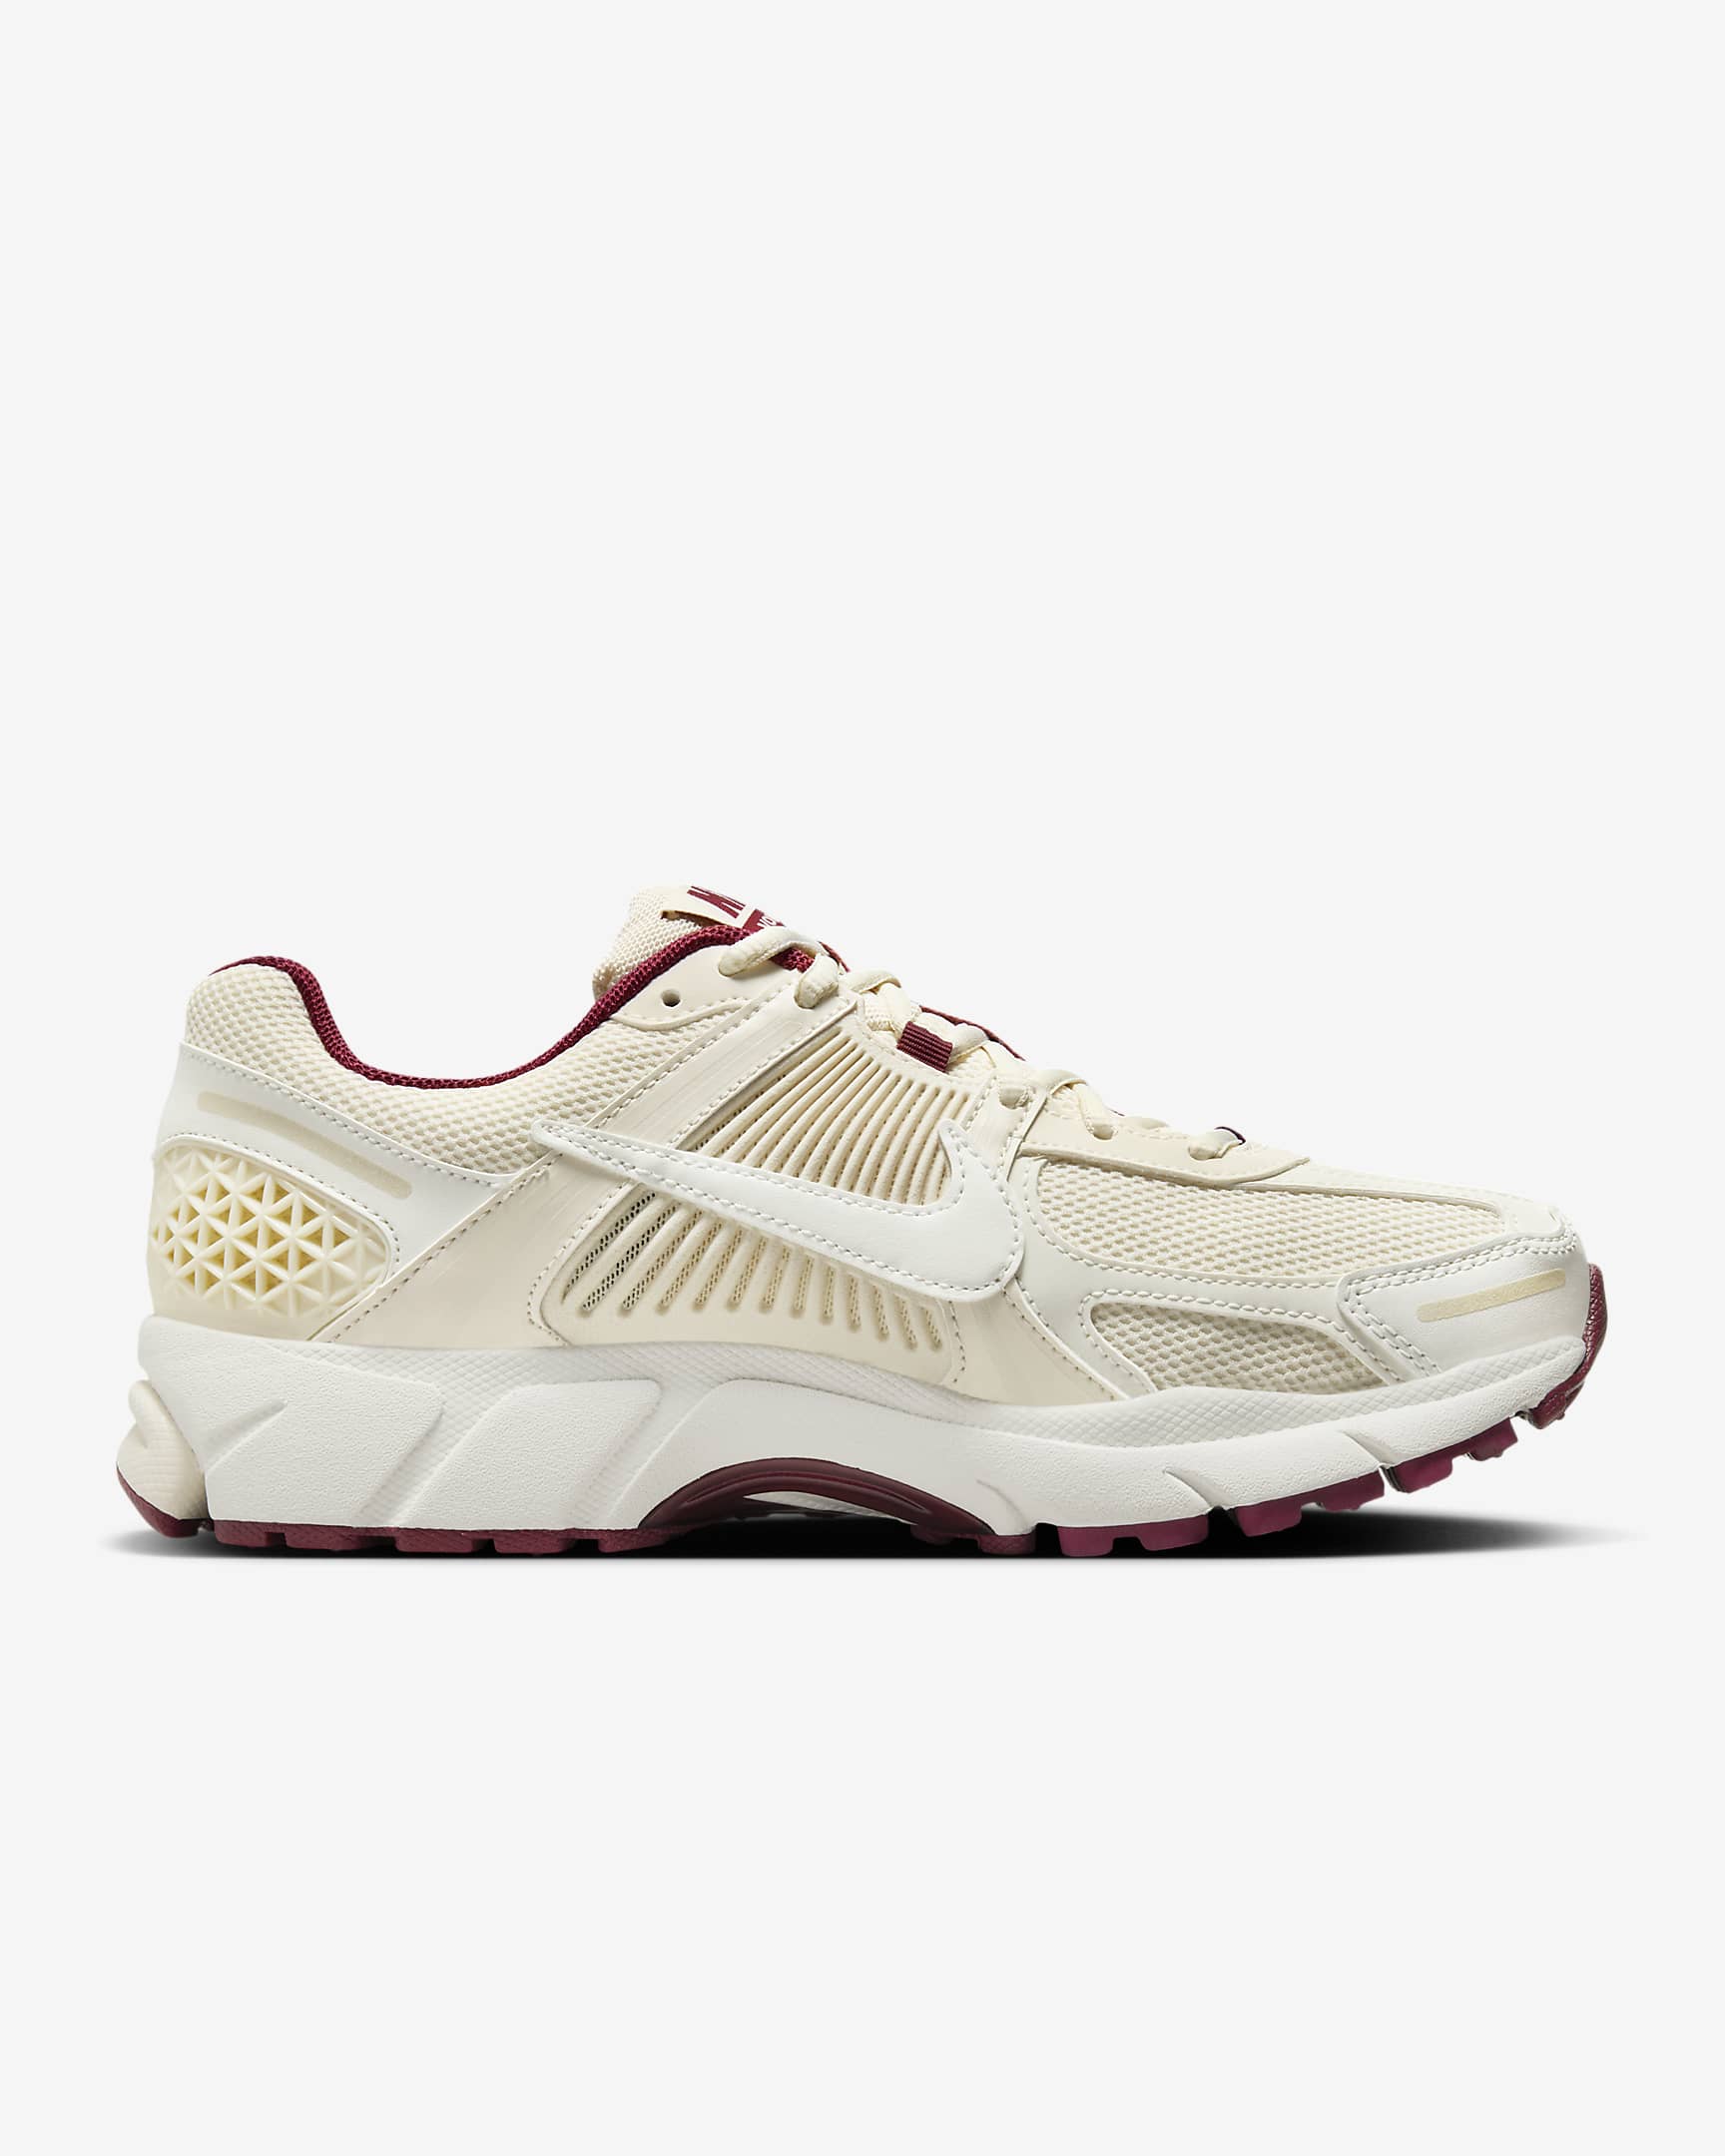 Nike Zoom Vomero 5 Women's Shoes - Sail/Pale Ivory/Team Red/Sail